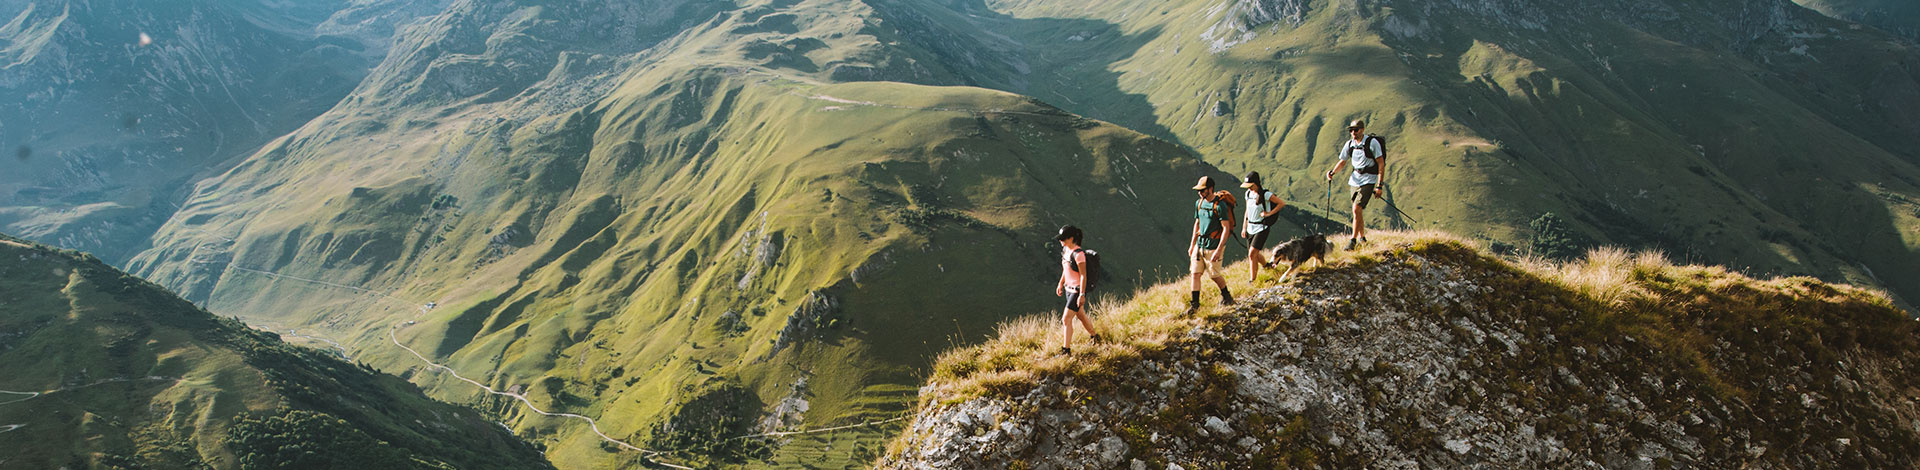 Access the many hiking itineraries in the 3 Valleys thanks to the 2-section pedestrian pass